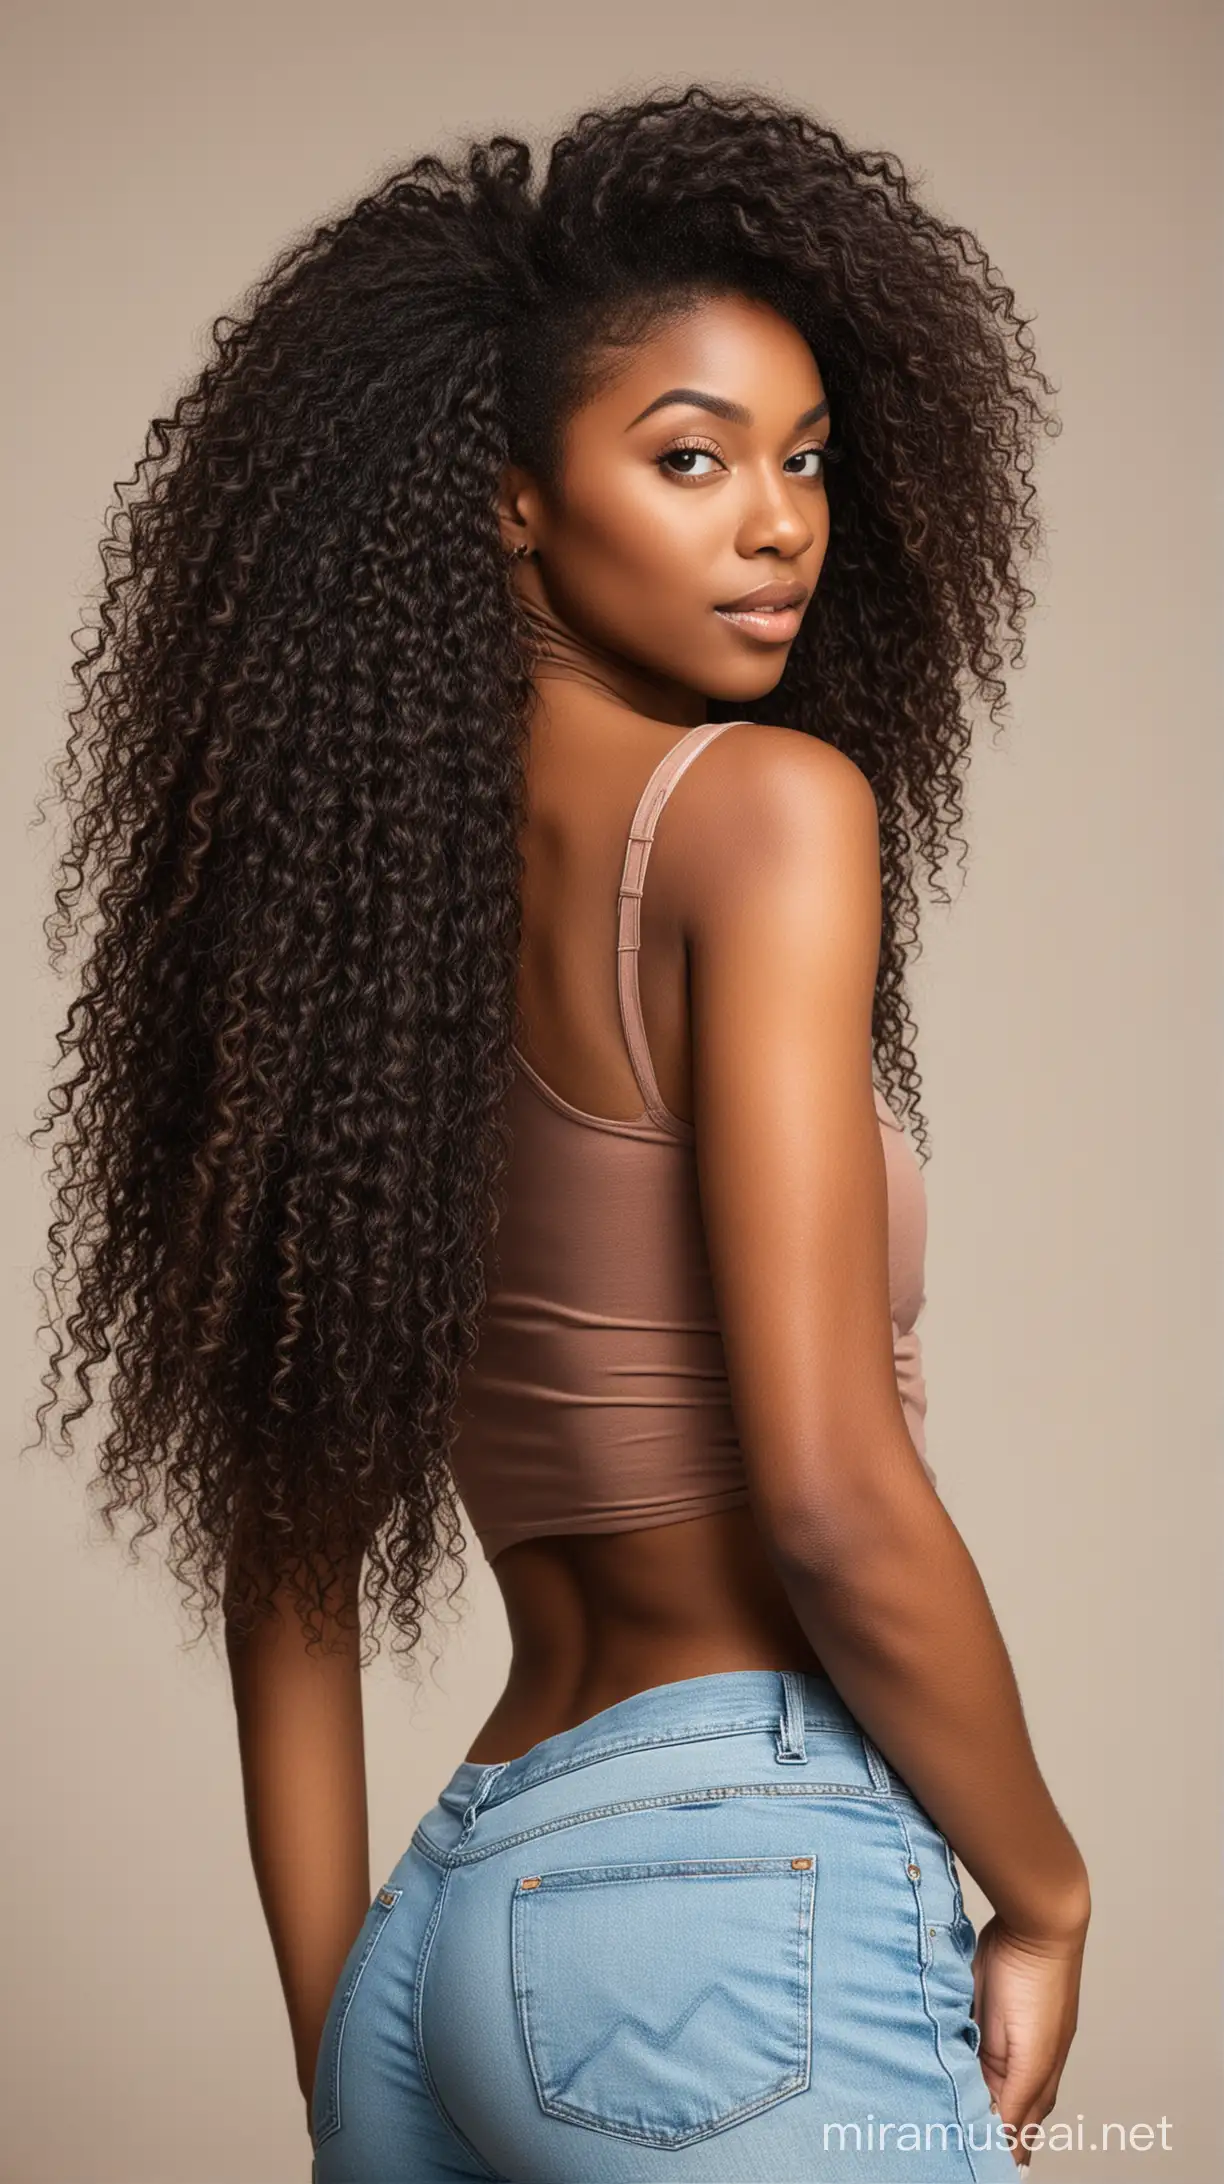 a standing beautiful black woman with beautiful hair
 